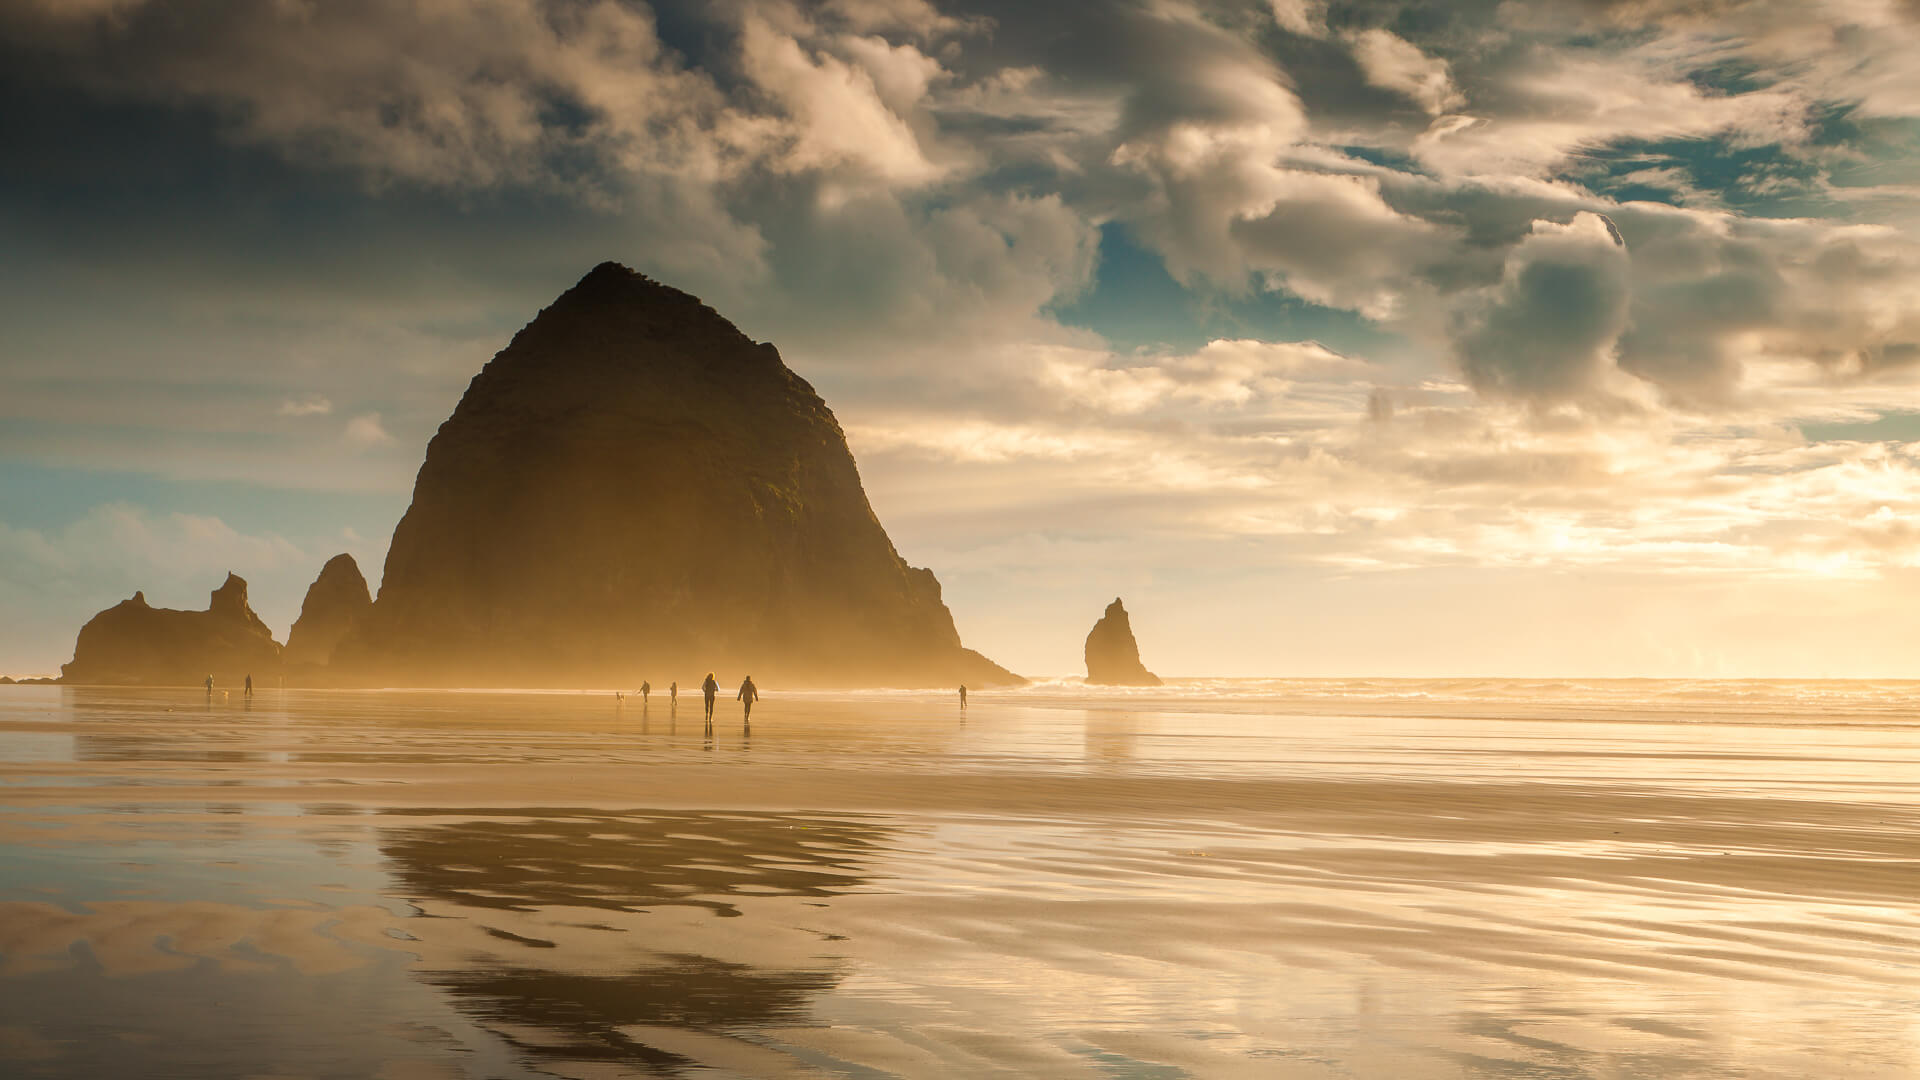 <ul> <li><strong>Cost of living expenditures: </strong>$1,717</li> <li><strong>Livability score: </strong>79</li> </ul> <p>When it comes to atmosphere and livability, Oregon's coastal Cannon Beach is among the most beautiful cities on this list. Its beach is famous for Haystack Rock, which has appeared in National Geographic. Just 90 minutes drive from the bigger city of Portland, Cannon Beach, with a population just over 1,300 people, offers a lot to appeal to lovers of art, eating out and, of course, nature, for an affordable price.</p>